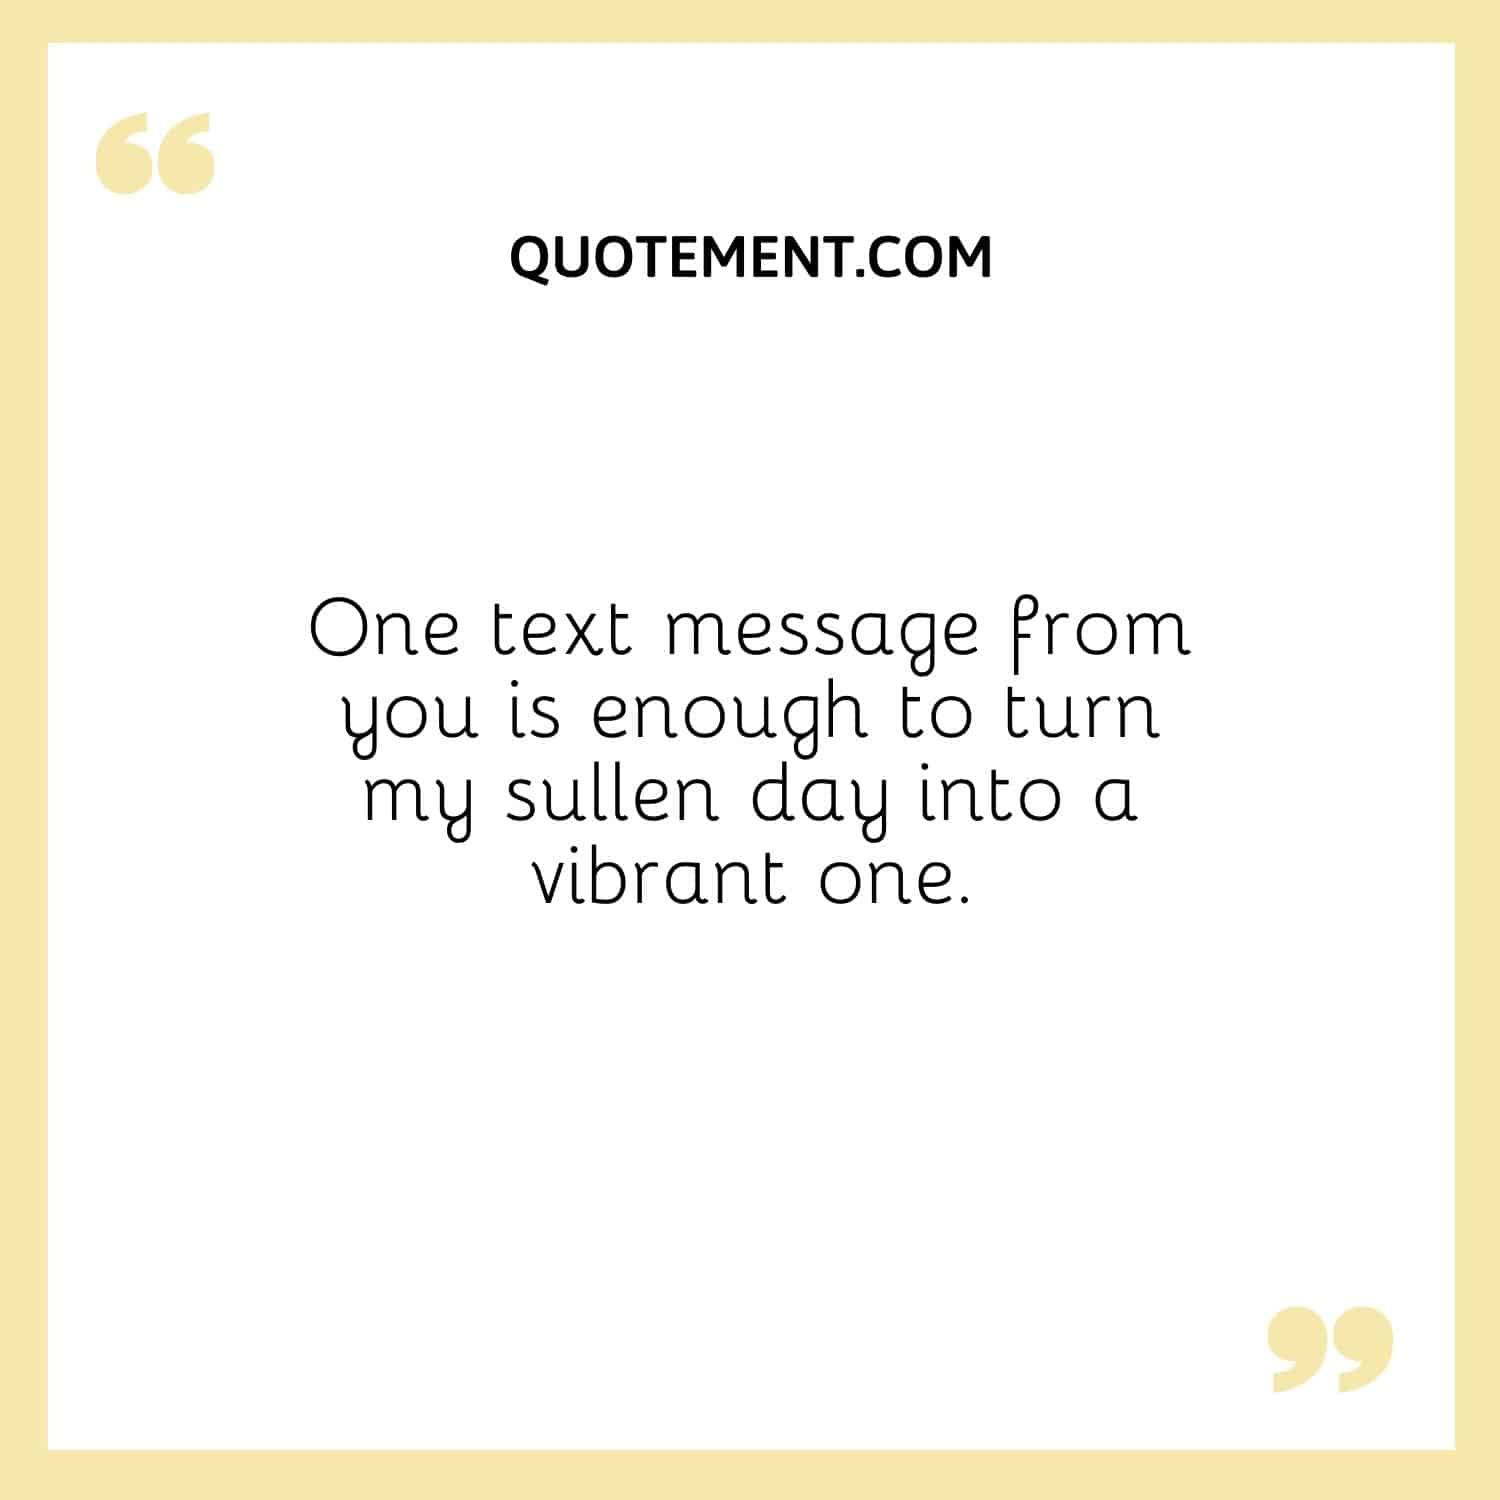 One text message from you is enough to turn my sullen day into a vibrant one